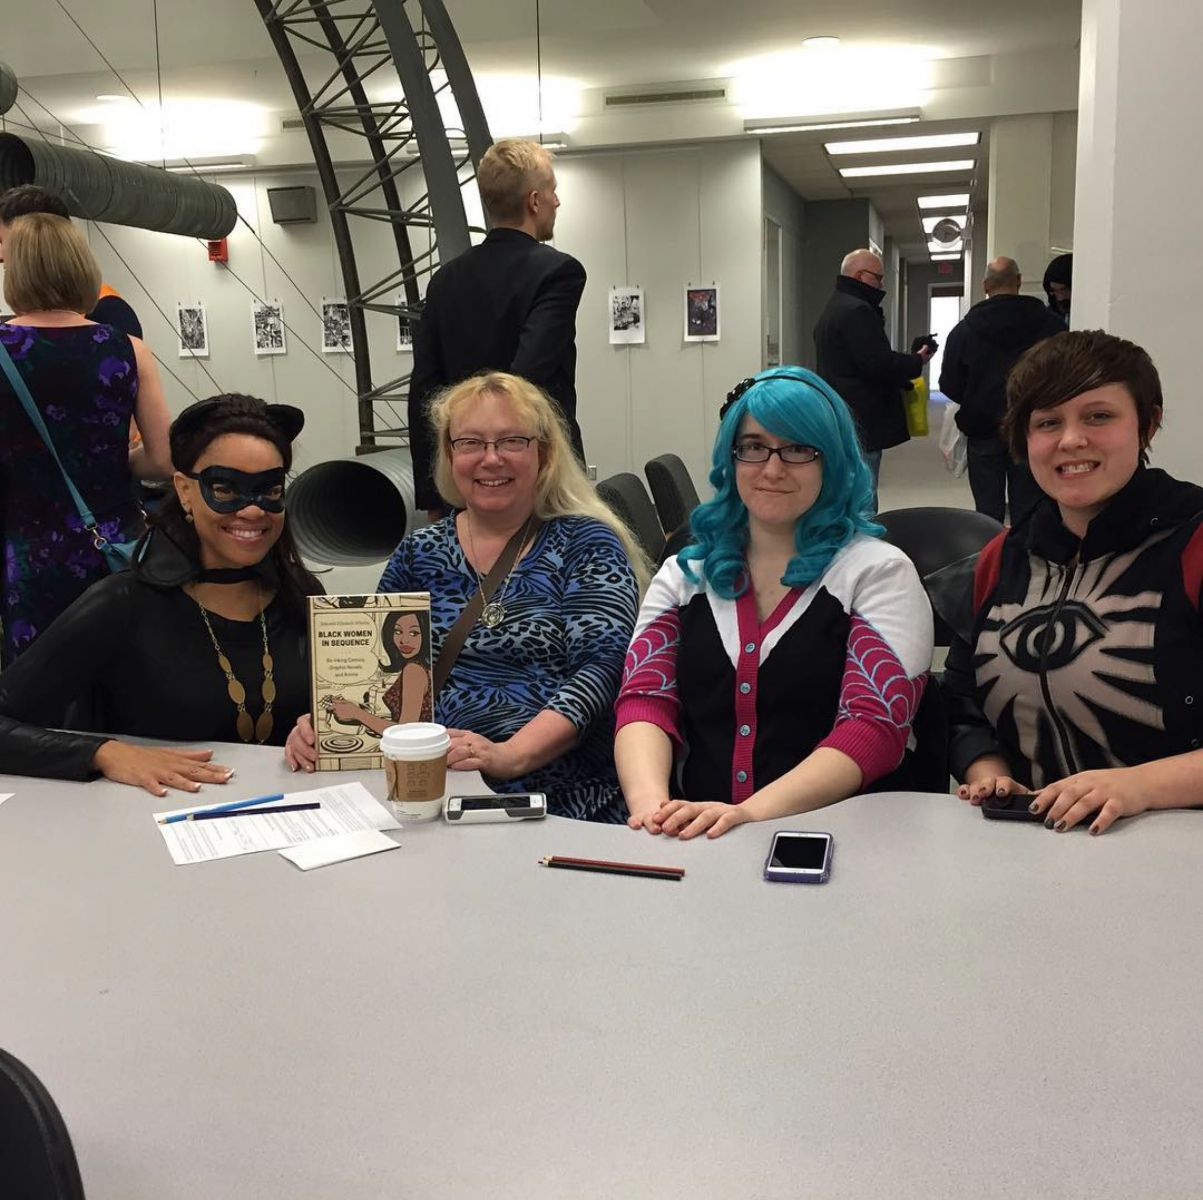 Whaley dressed as Catwoman, sitting next to three women